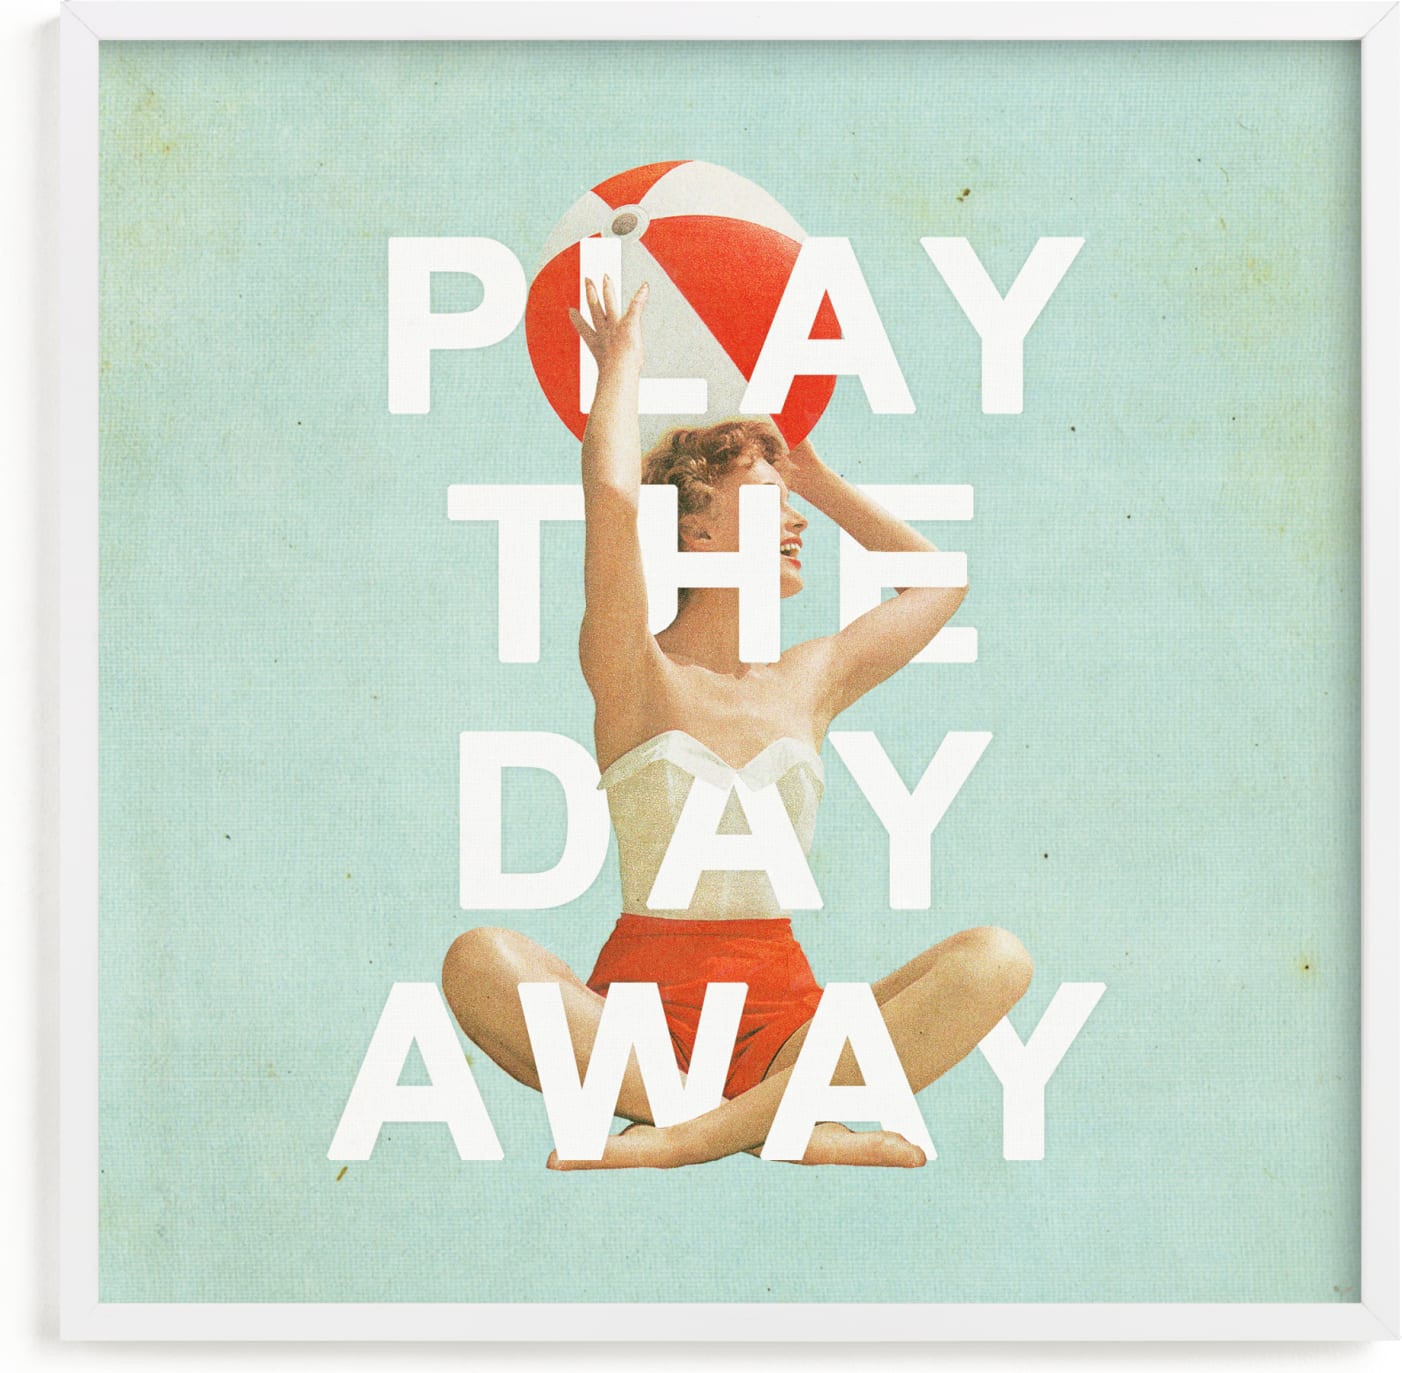 This is a blue art by Heather Landis called Play The Day Away.